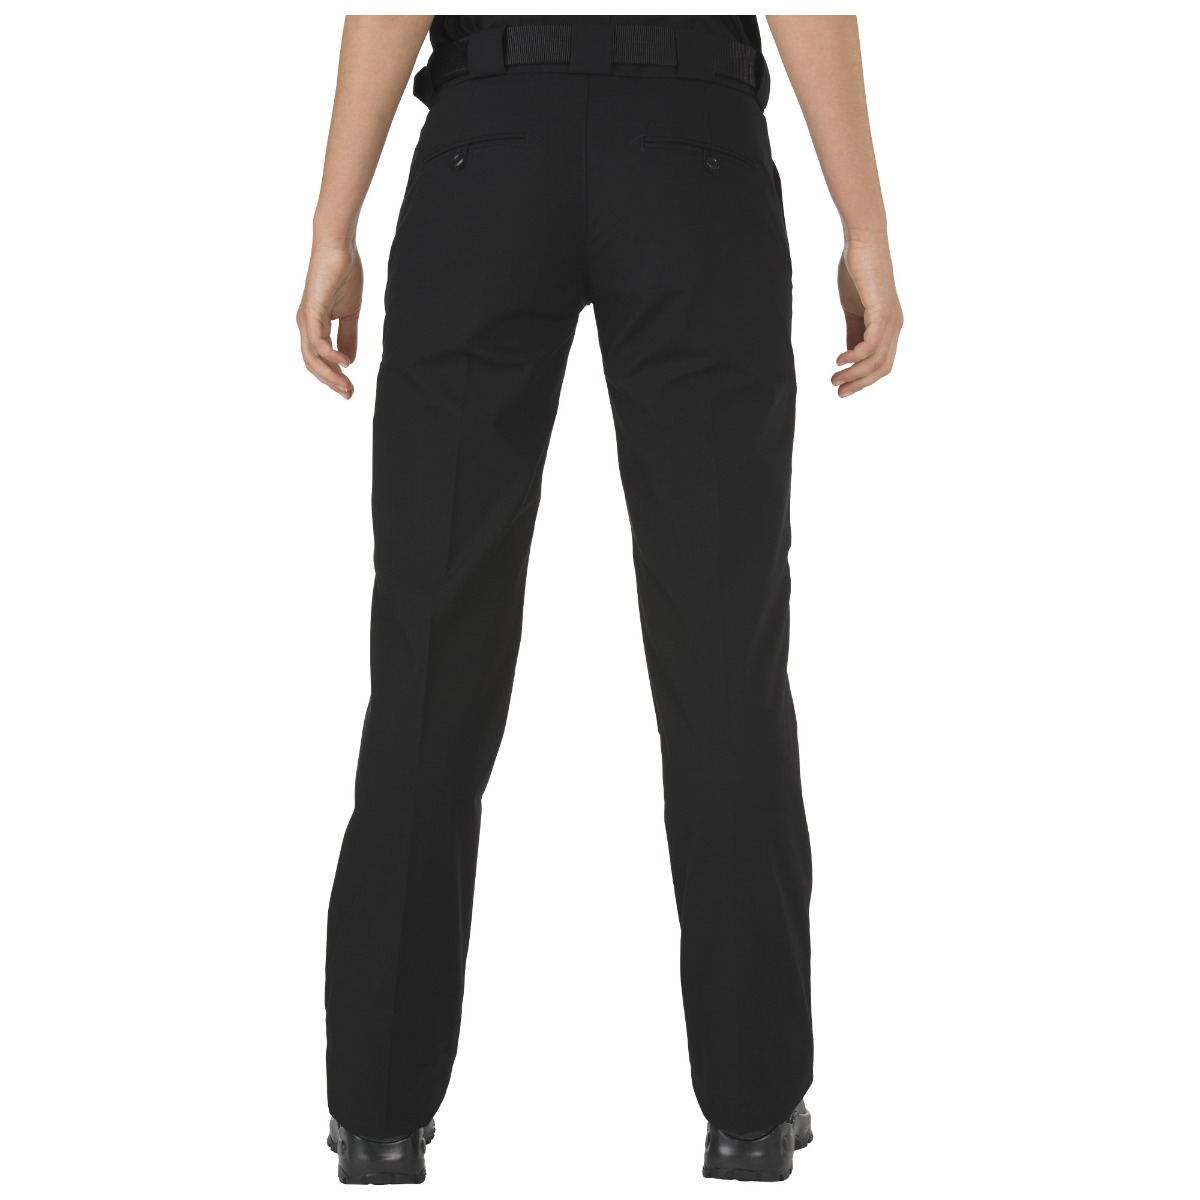 5.11 Strykeâ ¢ Class-A Pdu Pant From 5.11 Tactical-5.11 Tactical